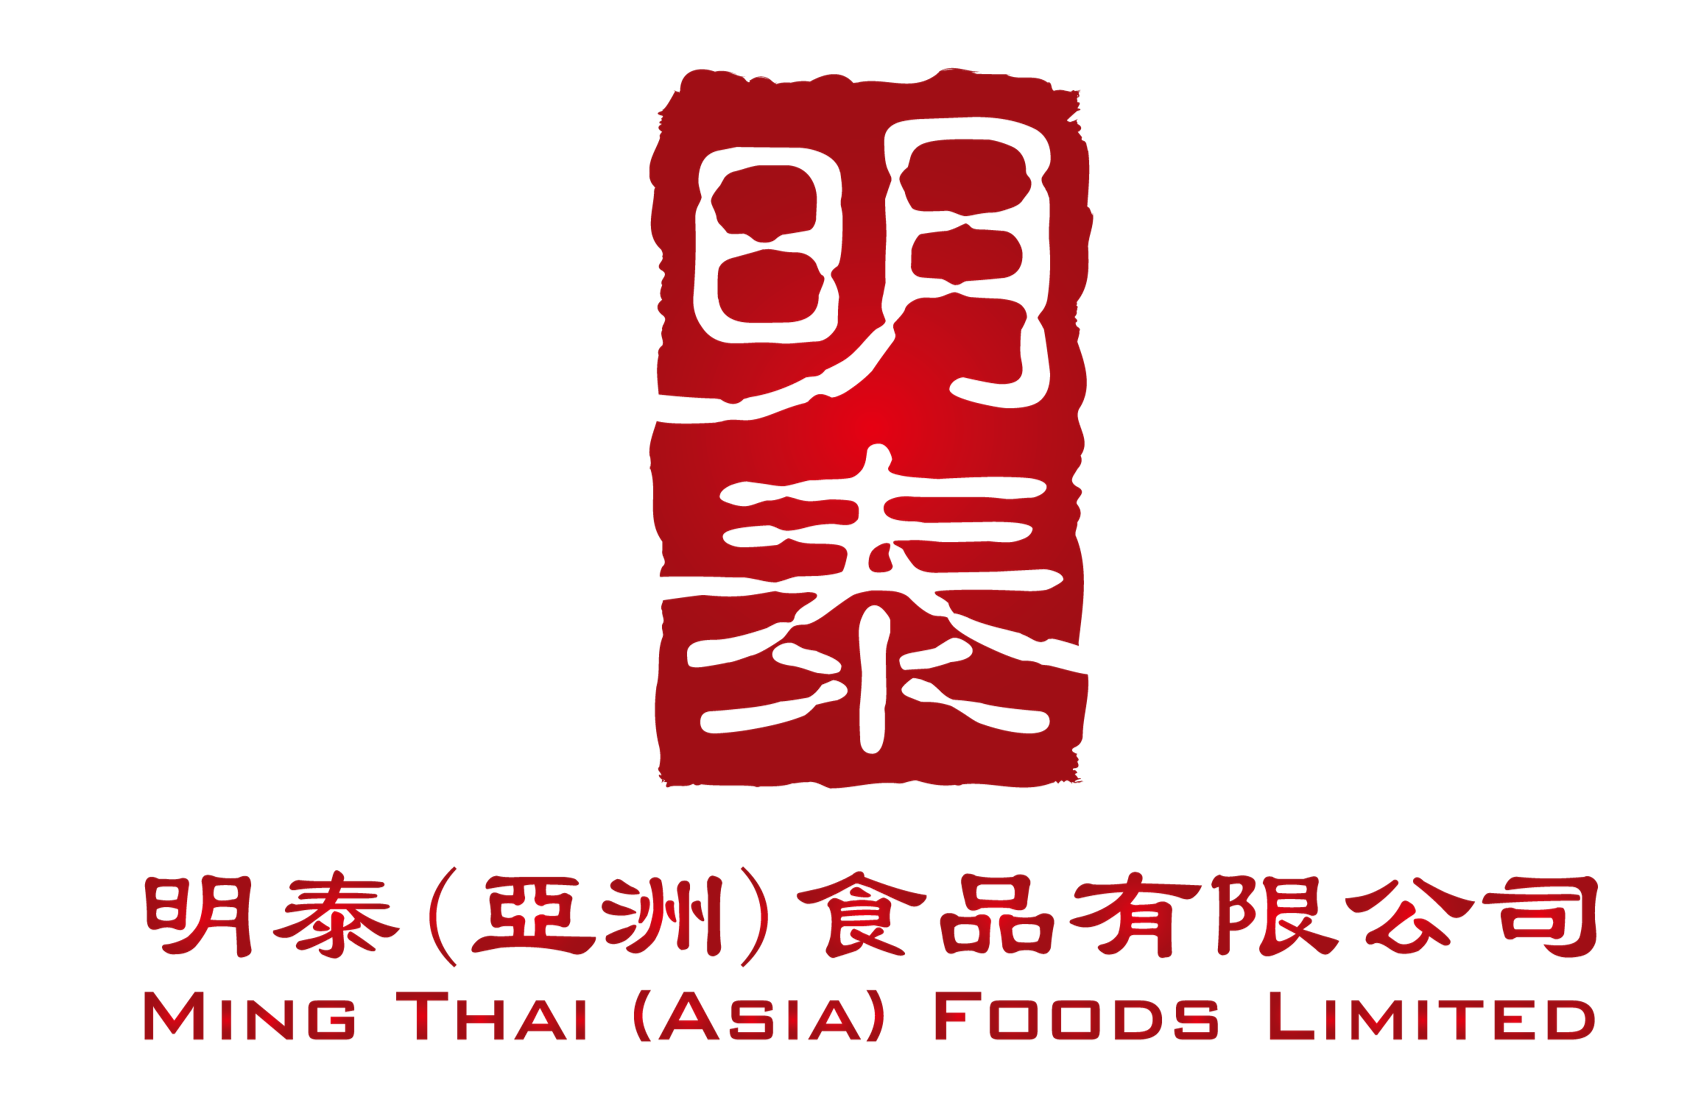 Ming Thai (Asia) Food Limited